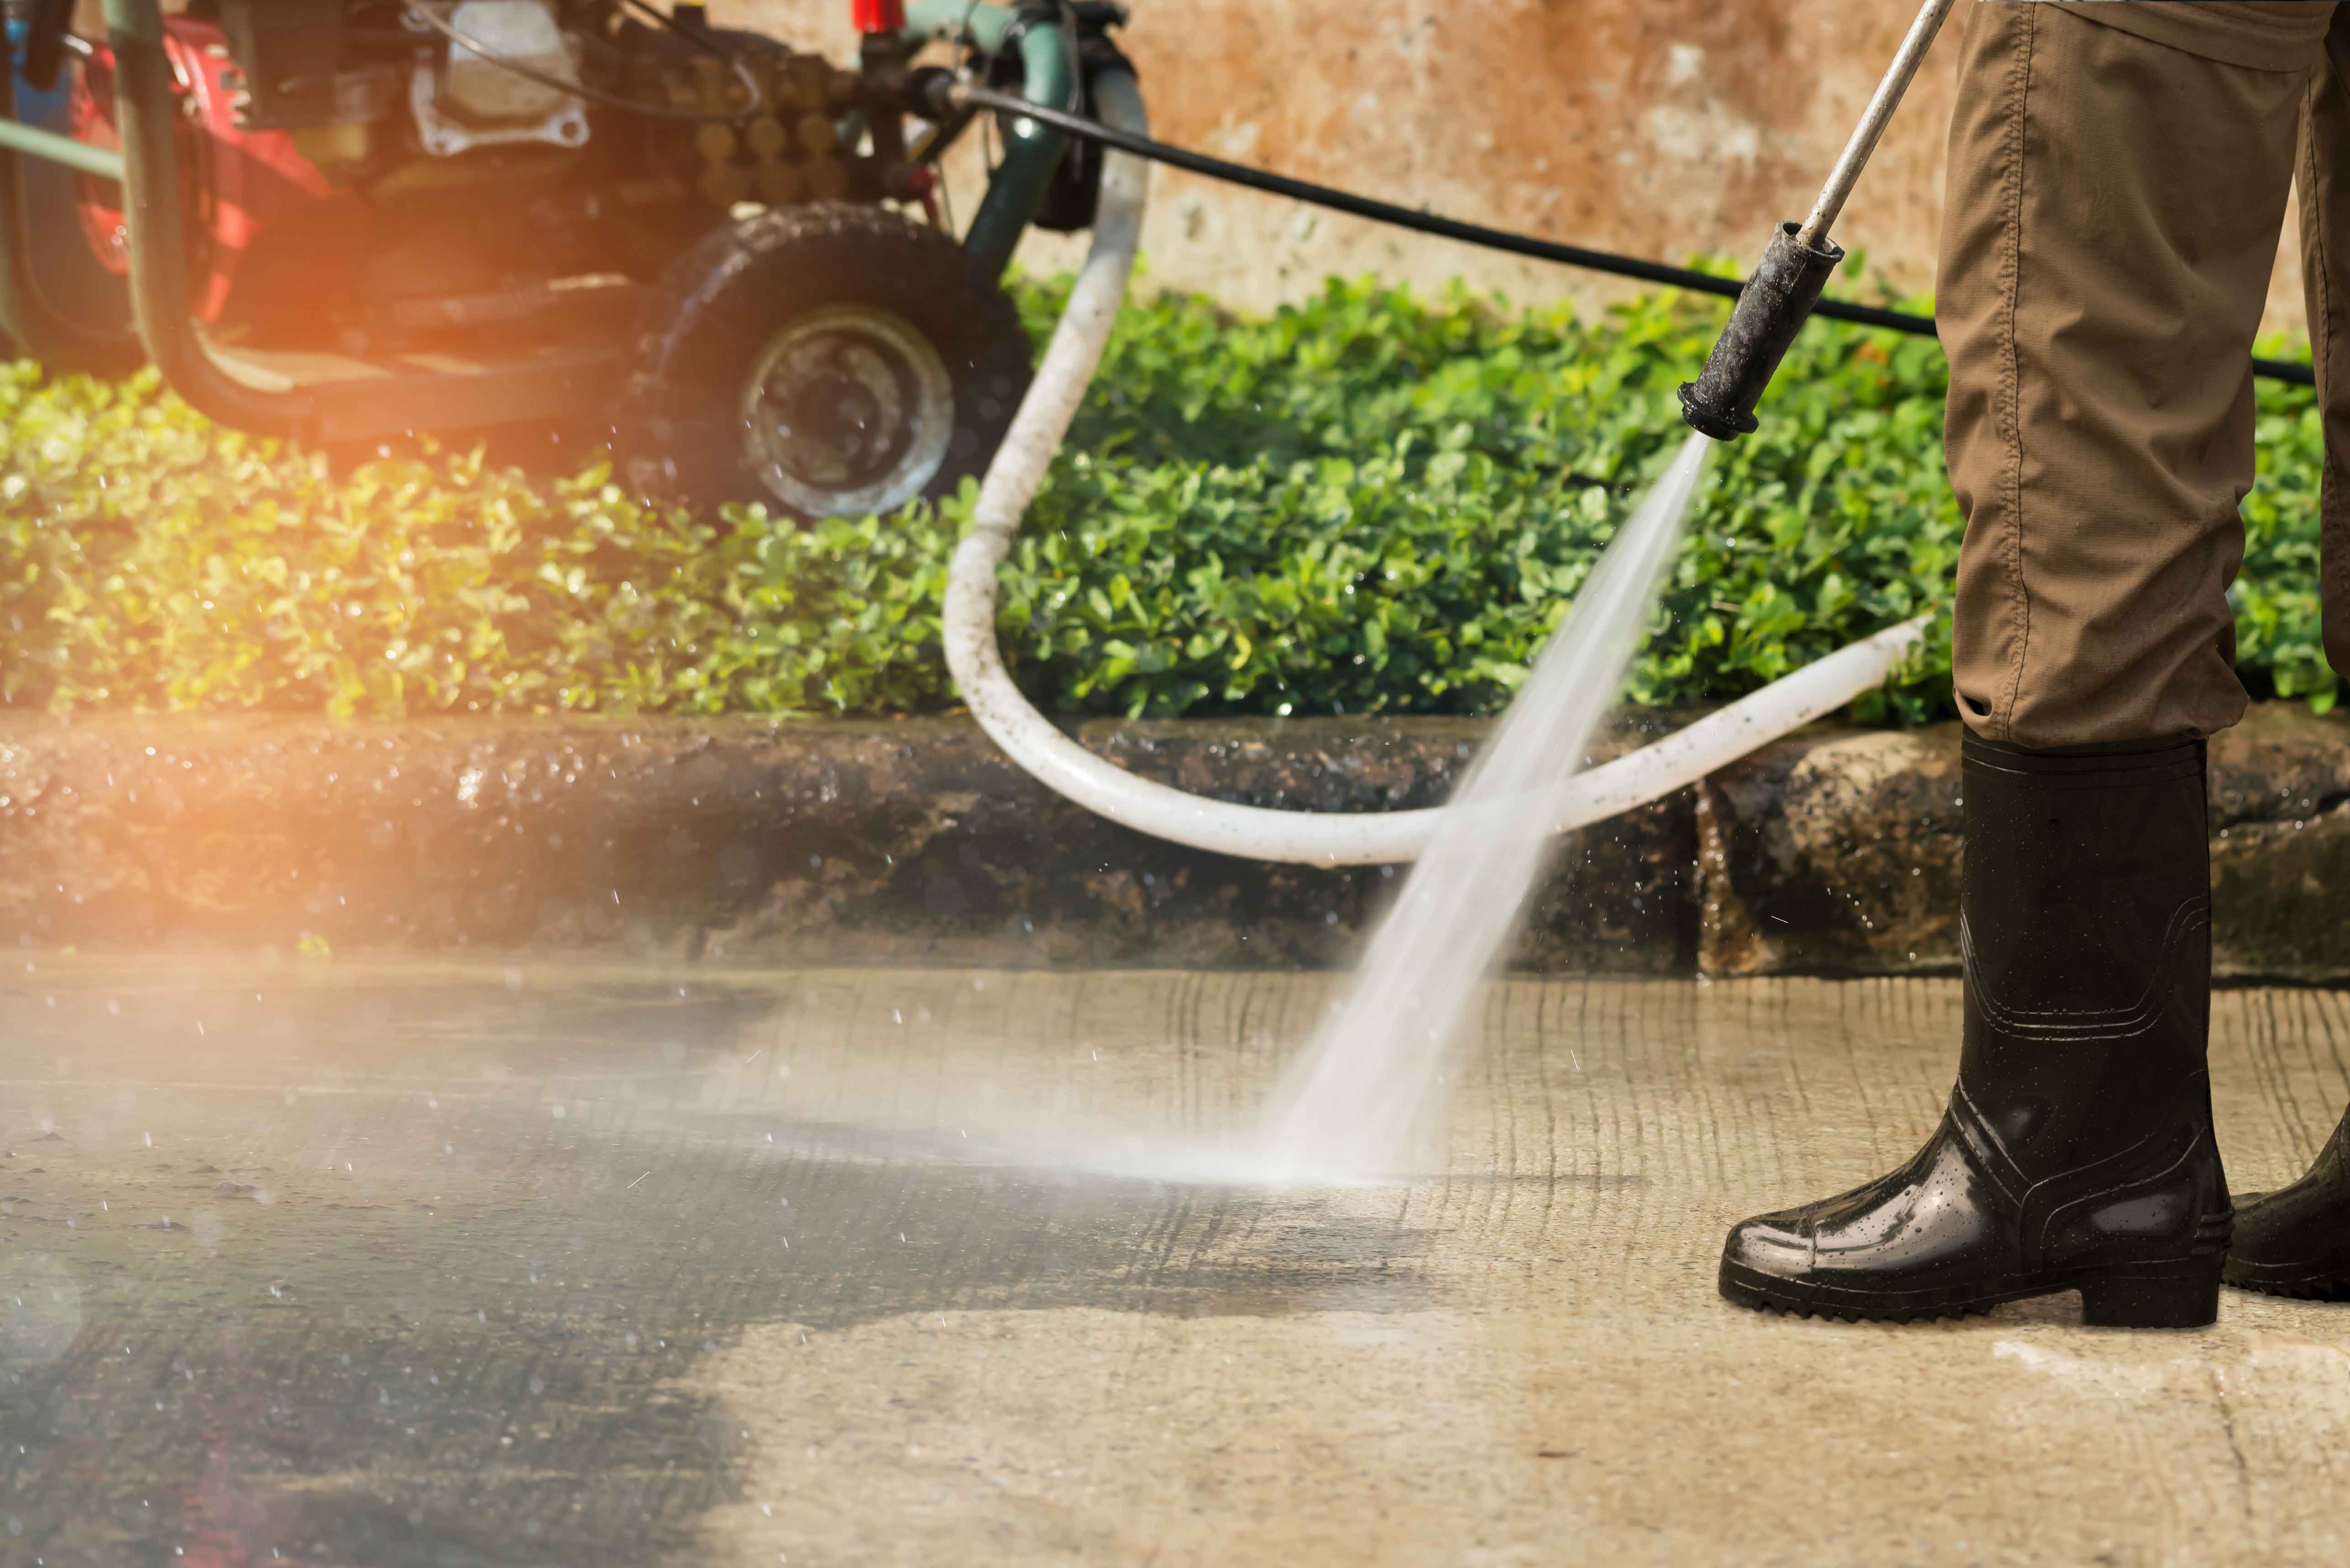 Pressure Washer Buyer's Guide - How to Pick the Perfect Pressure